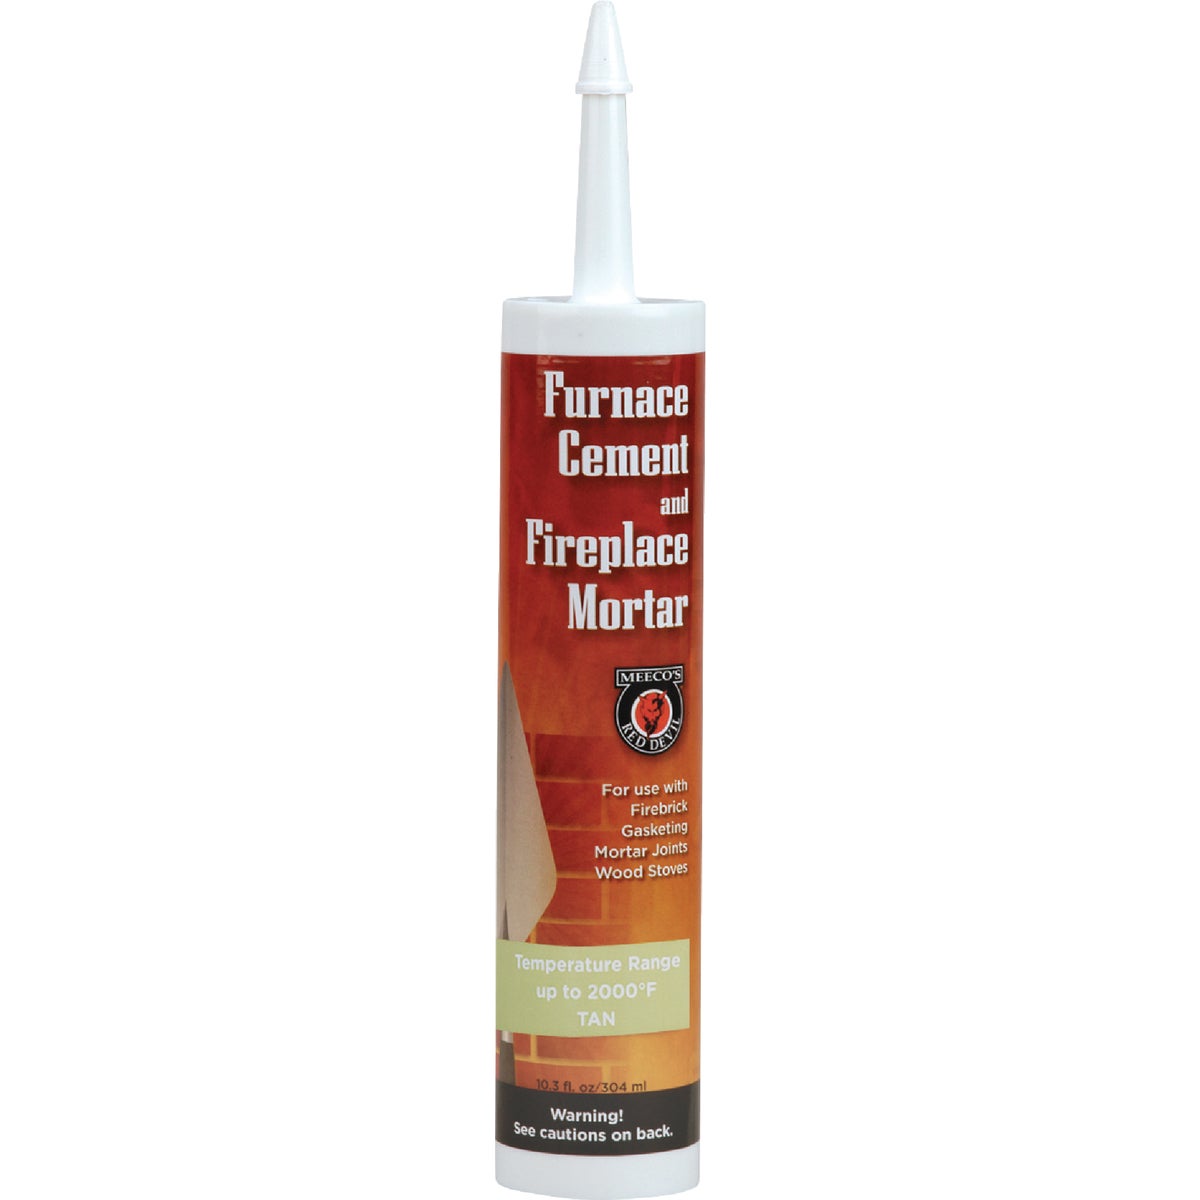 Item 437414, Furnace cement and fireplace mortar in a convenient 10.